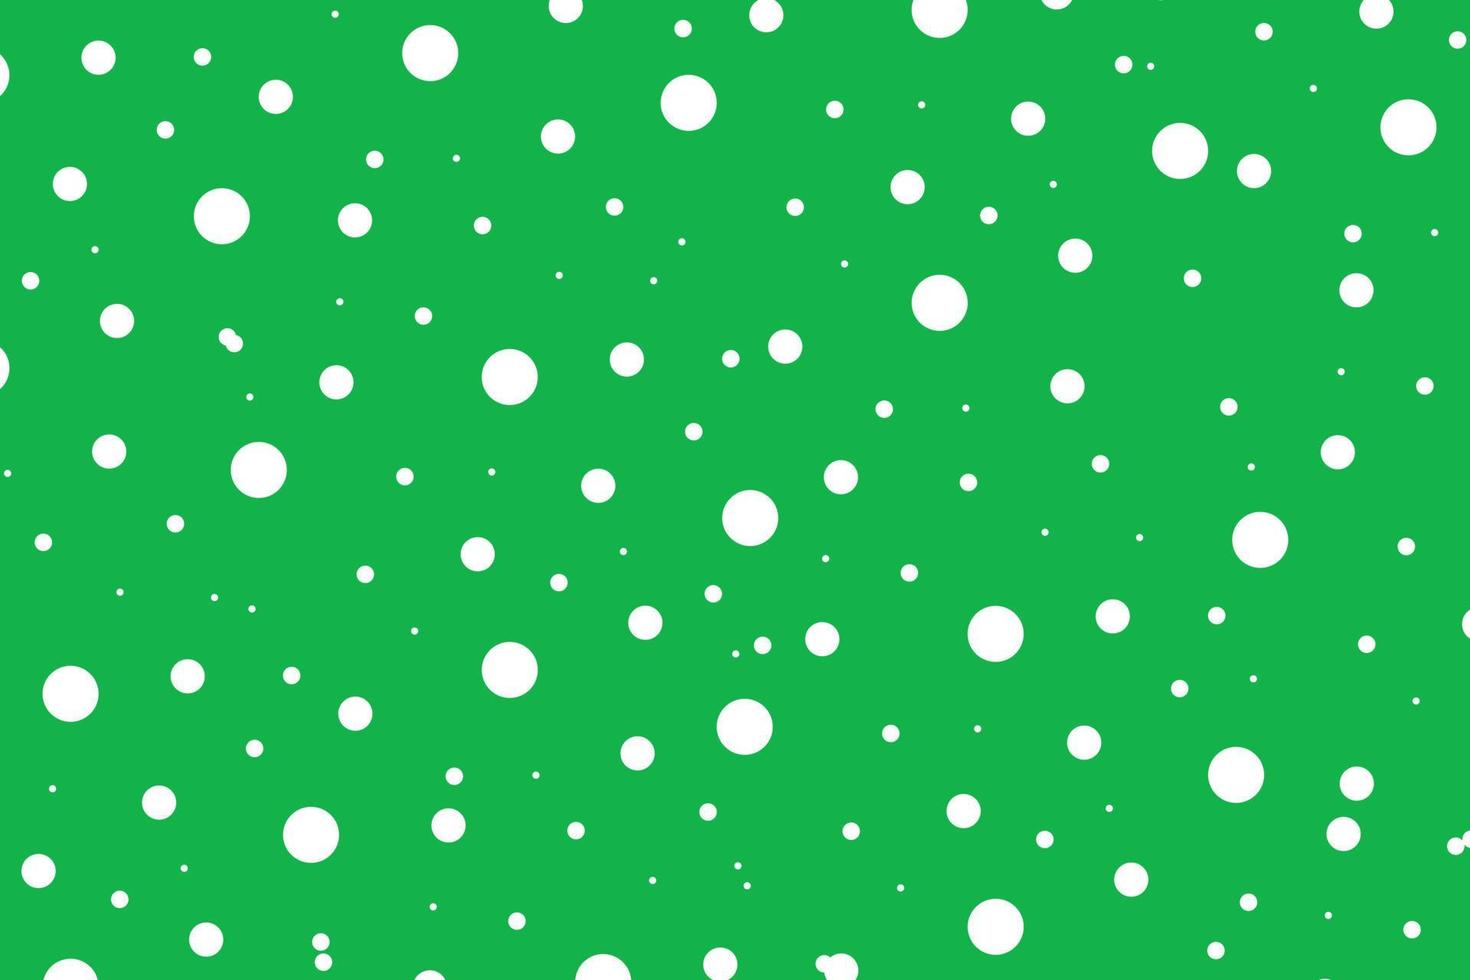 abstract white polka dots on green background design. vector